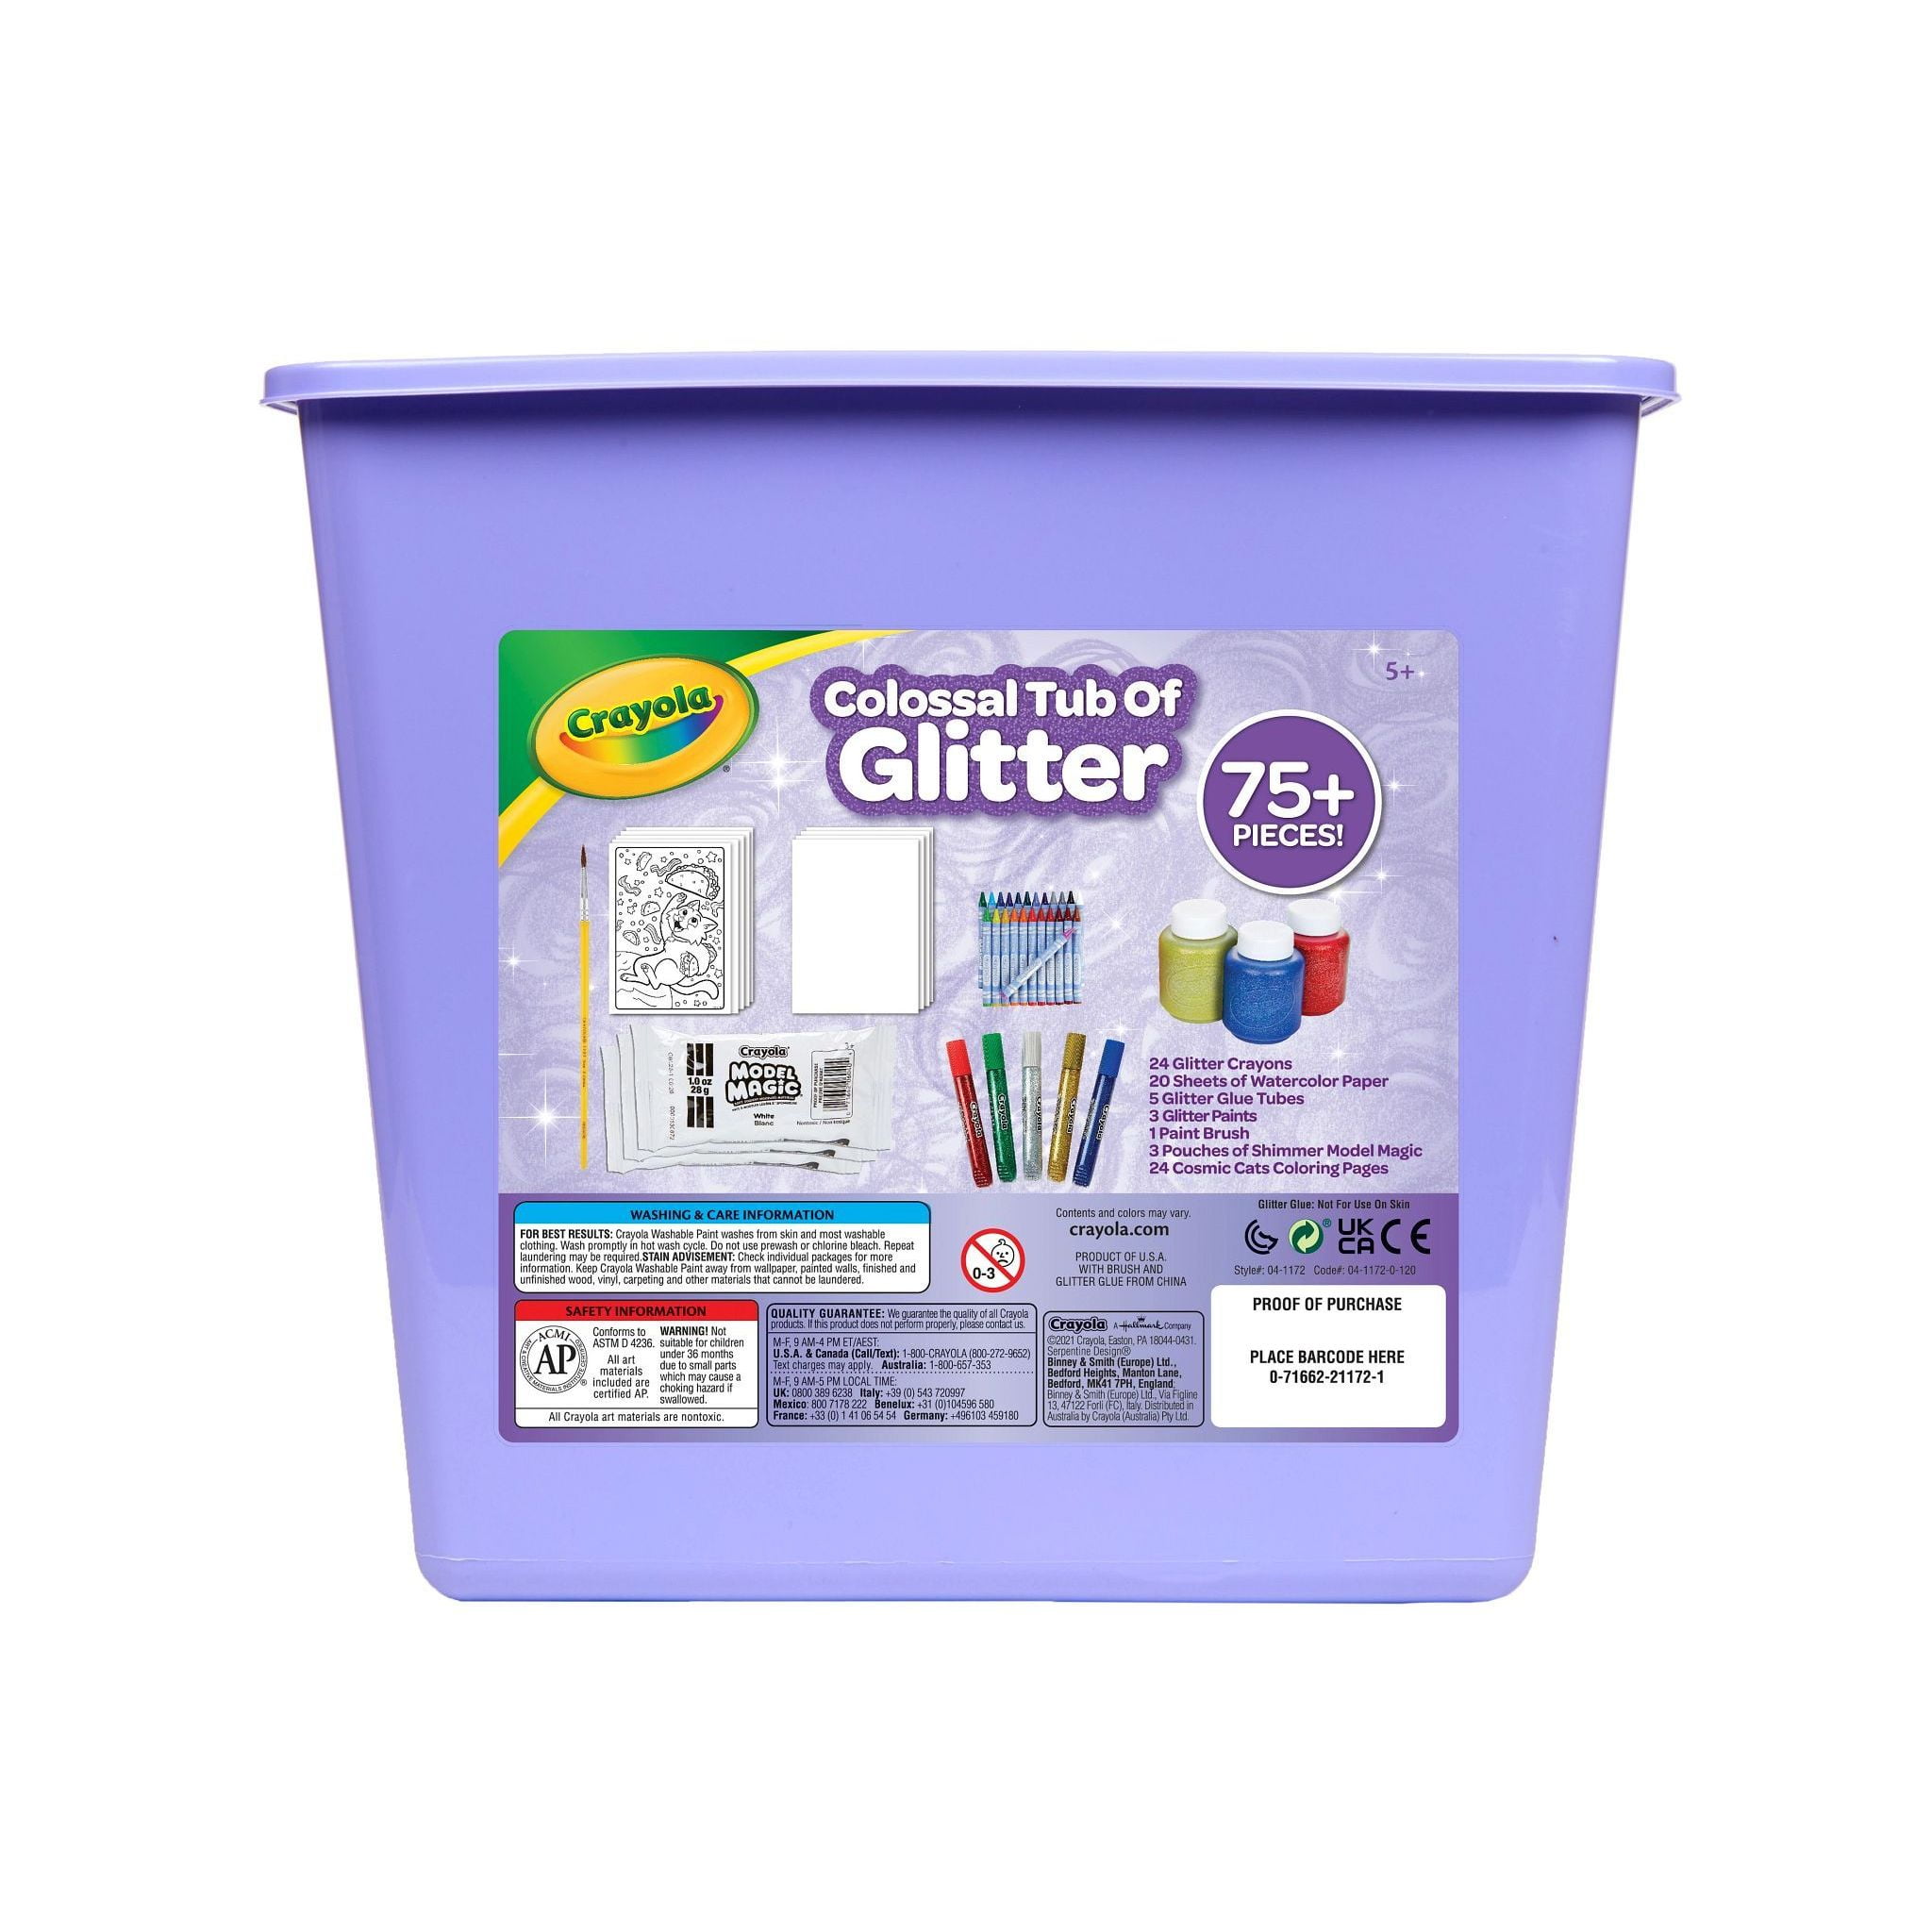 Keep the kids entertained with this Crayola Glitter Art Kit at under $10